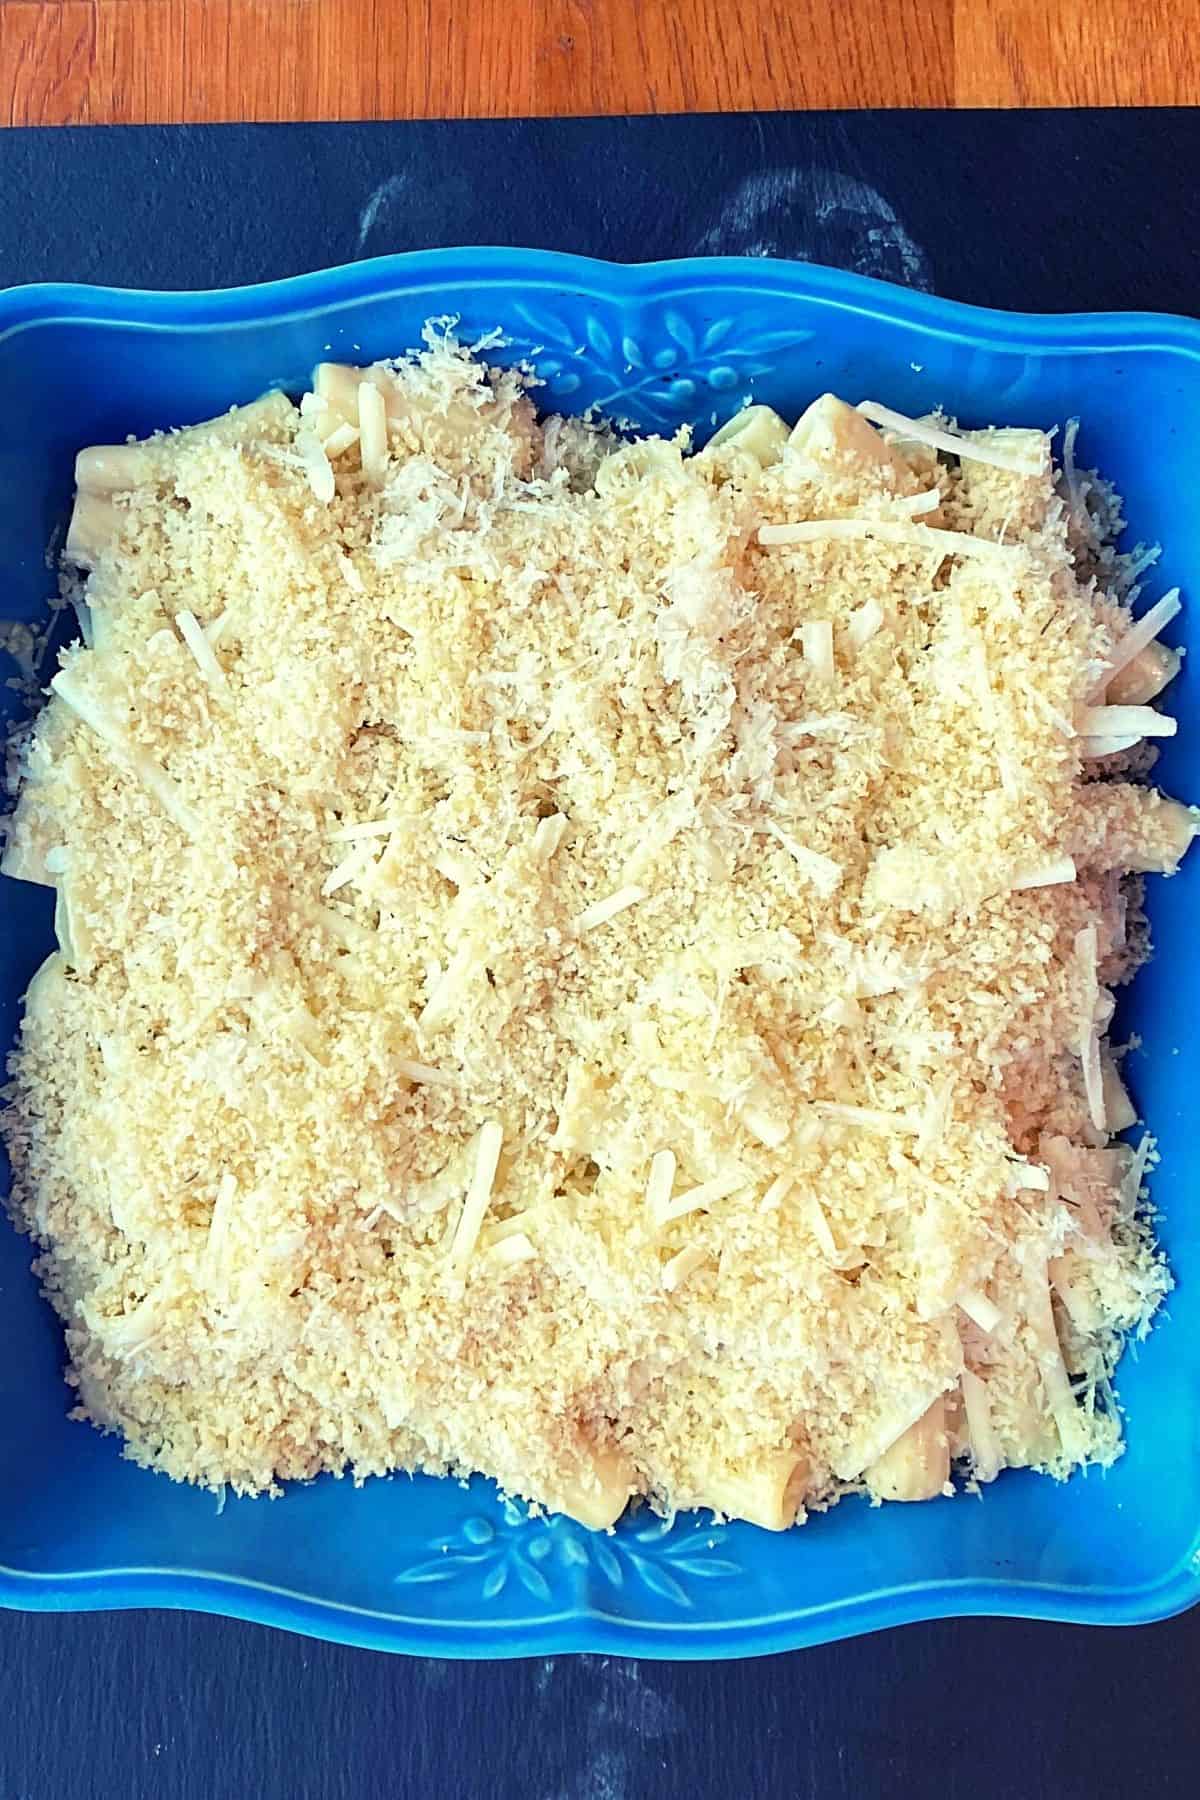 Overhead view of bread crumb and cheese sprinkled over pasta before baking